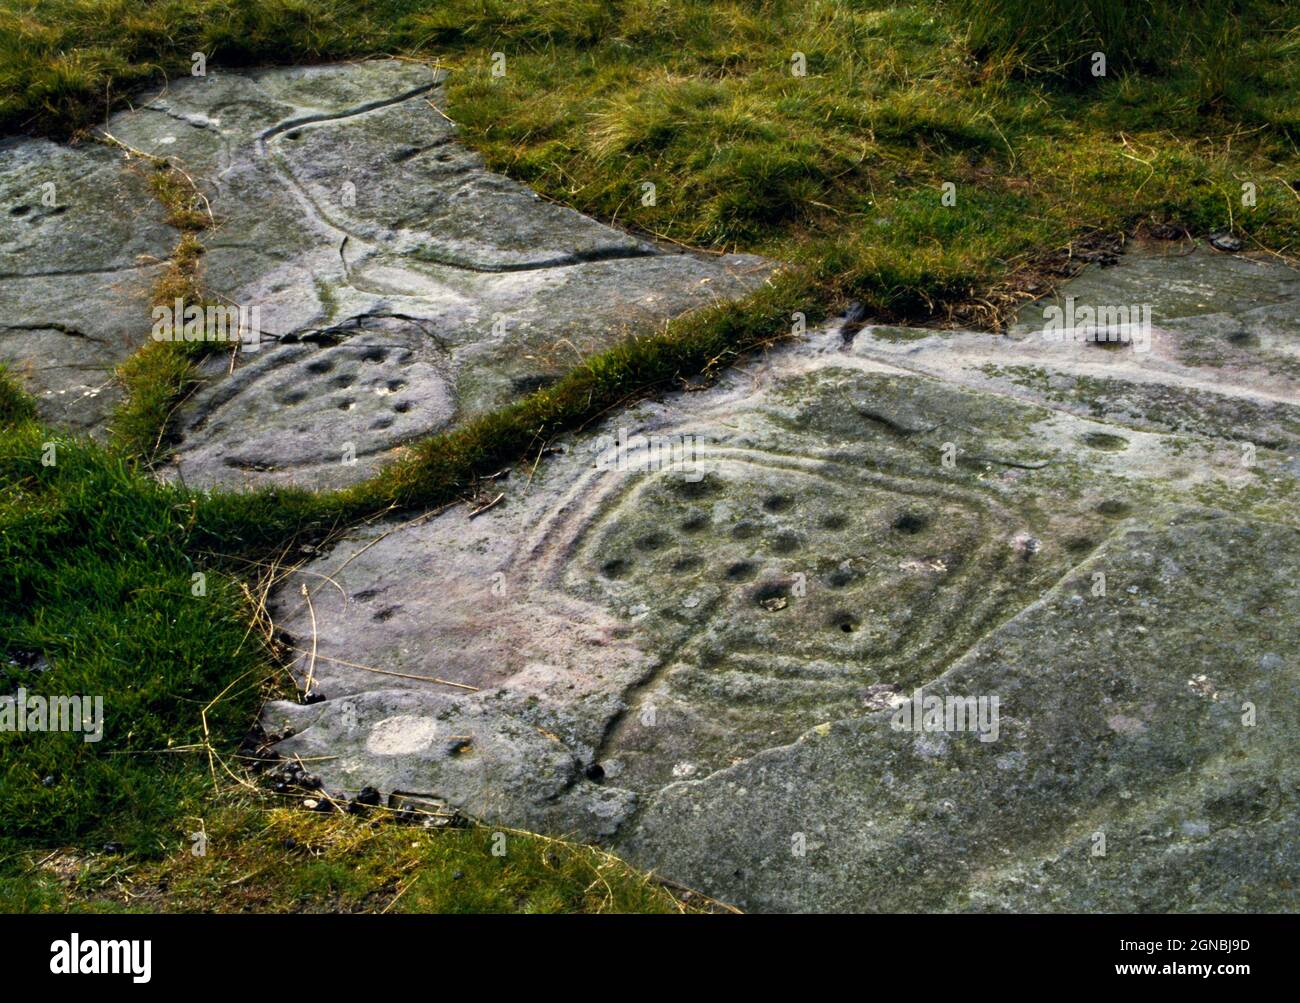 View E of prehistoric rock art on Dod Law, Northumberland, England, UK, showing cupmarks inside enclosures or frames delineated by grooves. Stock Photo